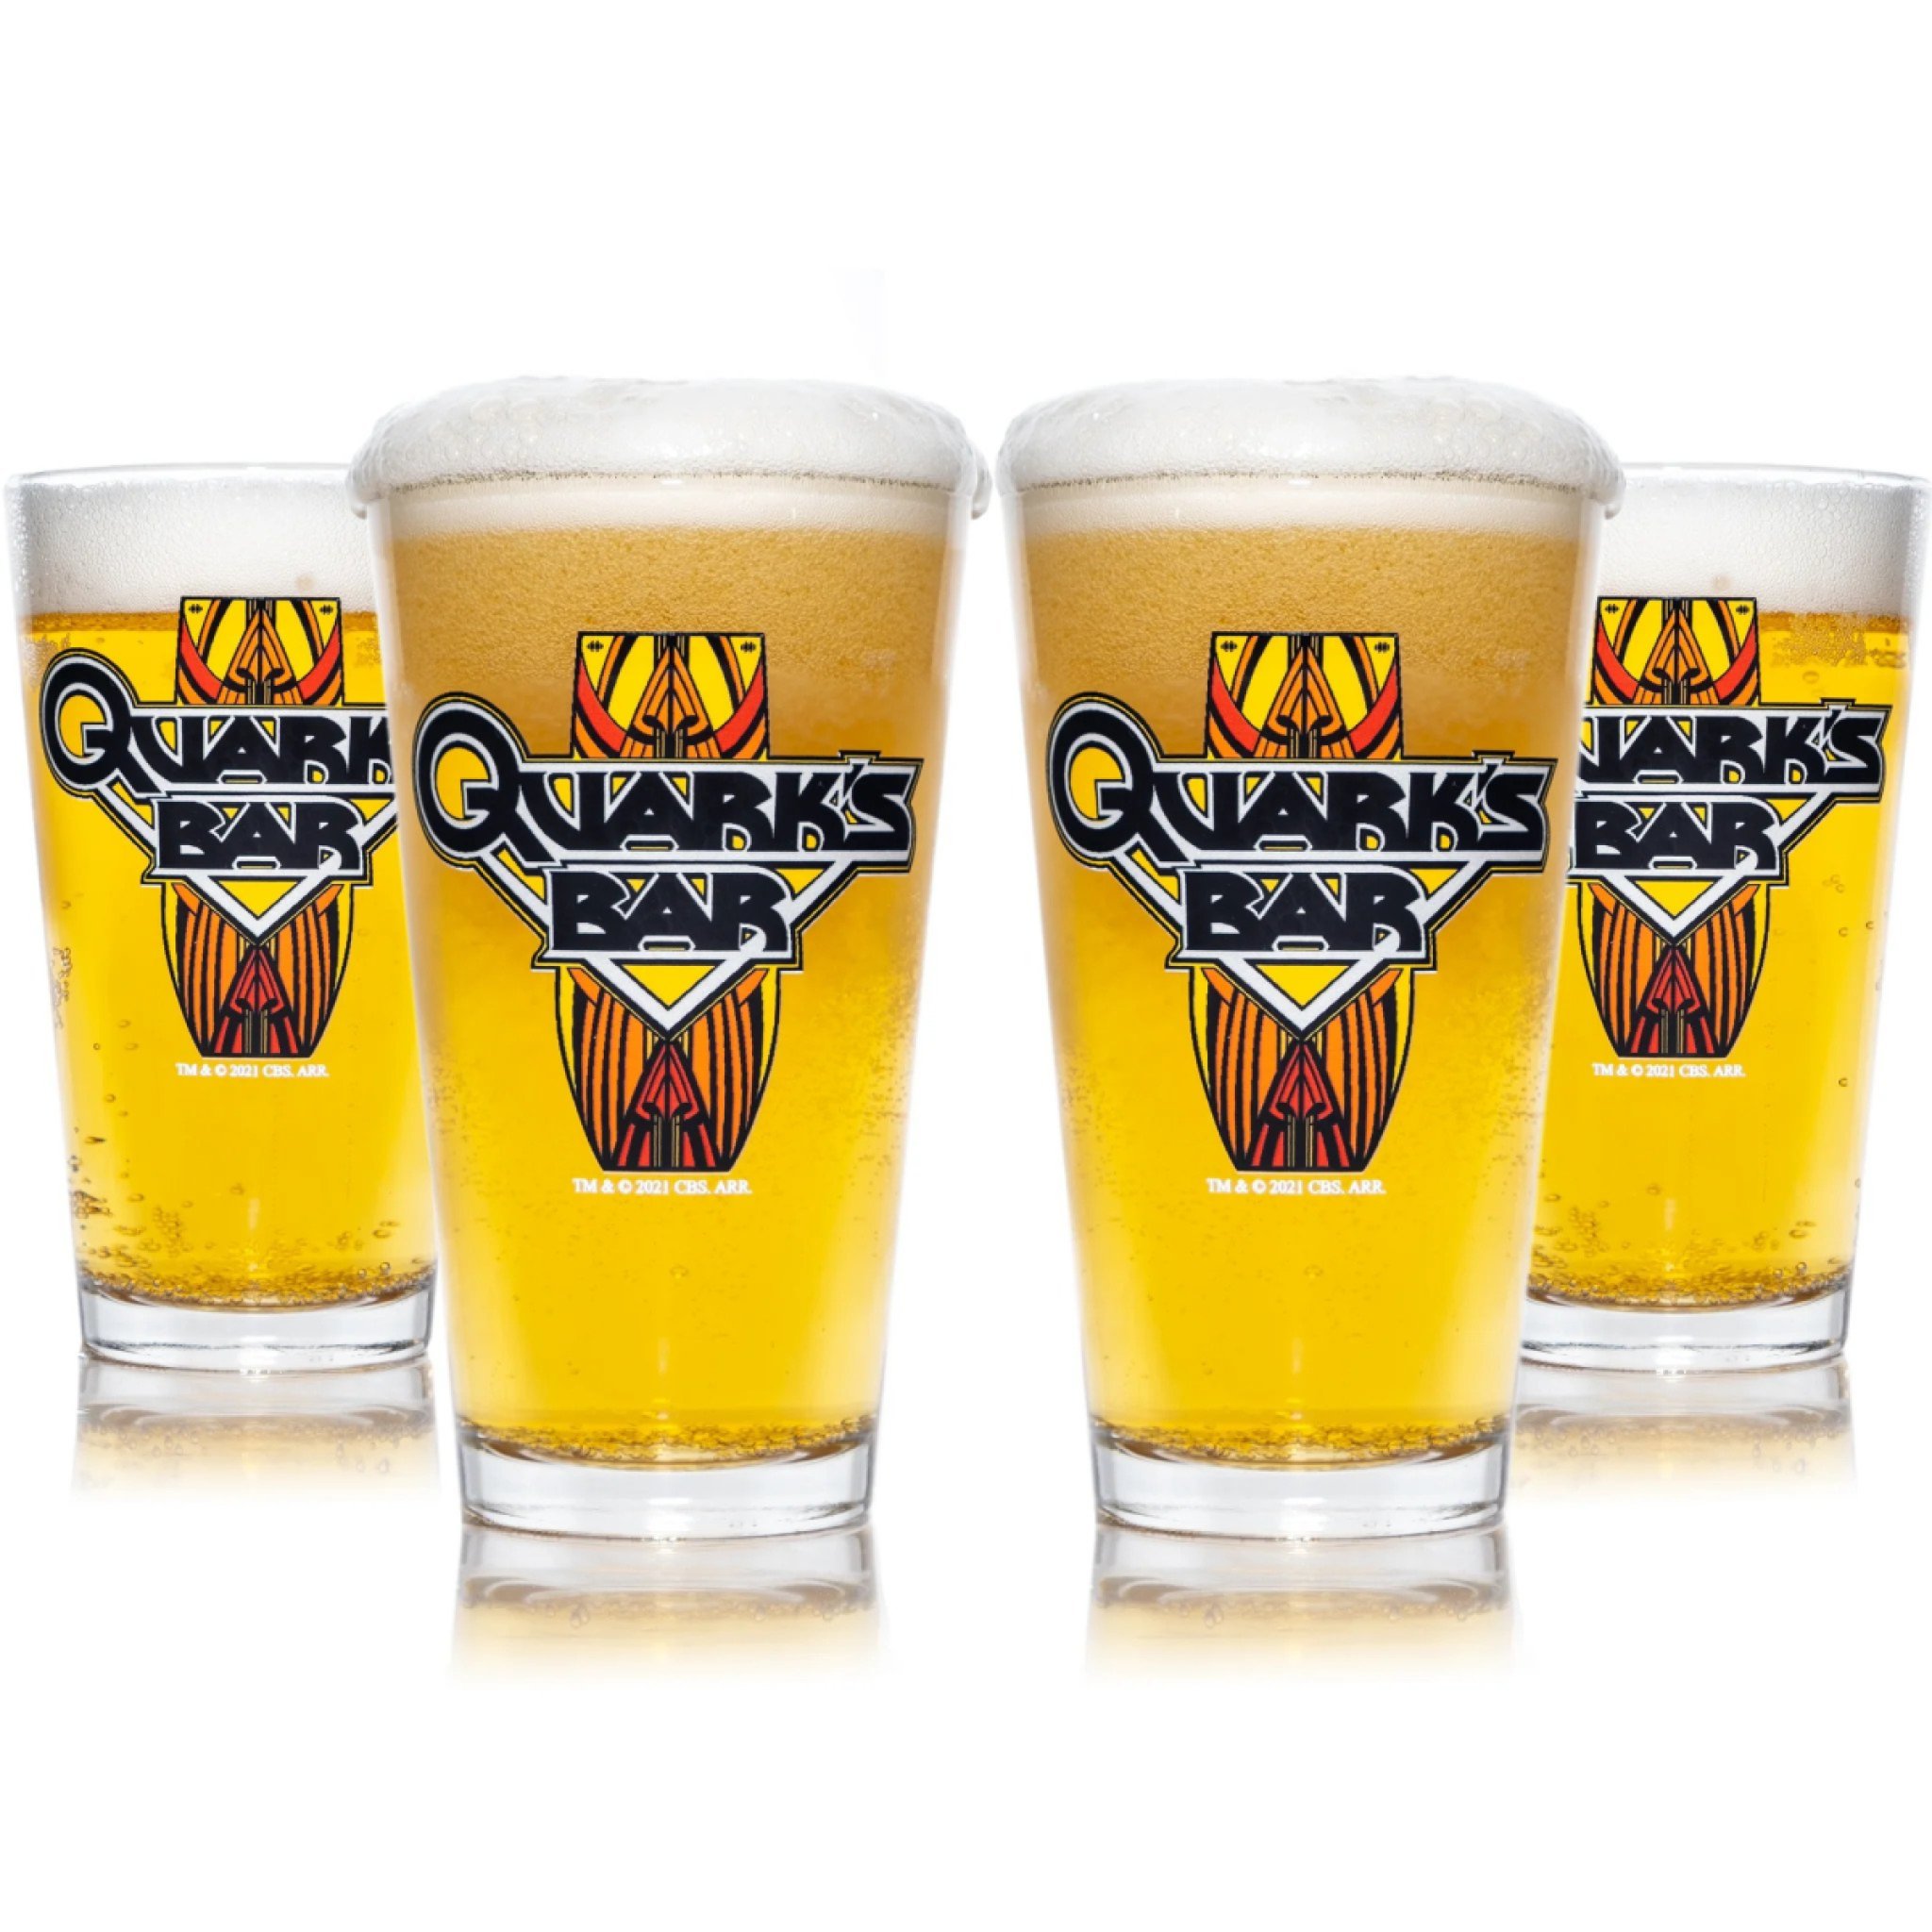 Four pint glasses filled with beer that have the logo for Quark's Bar on them.